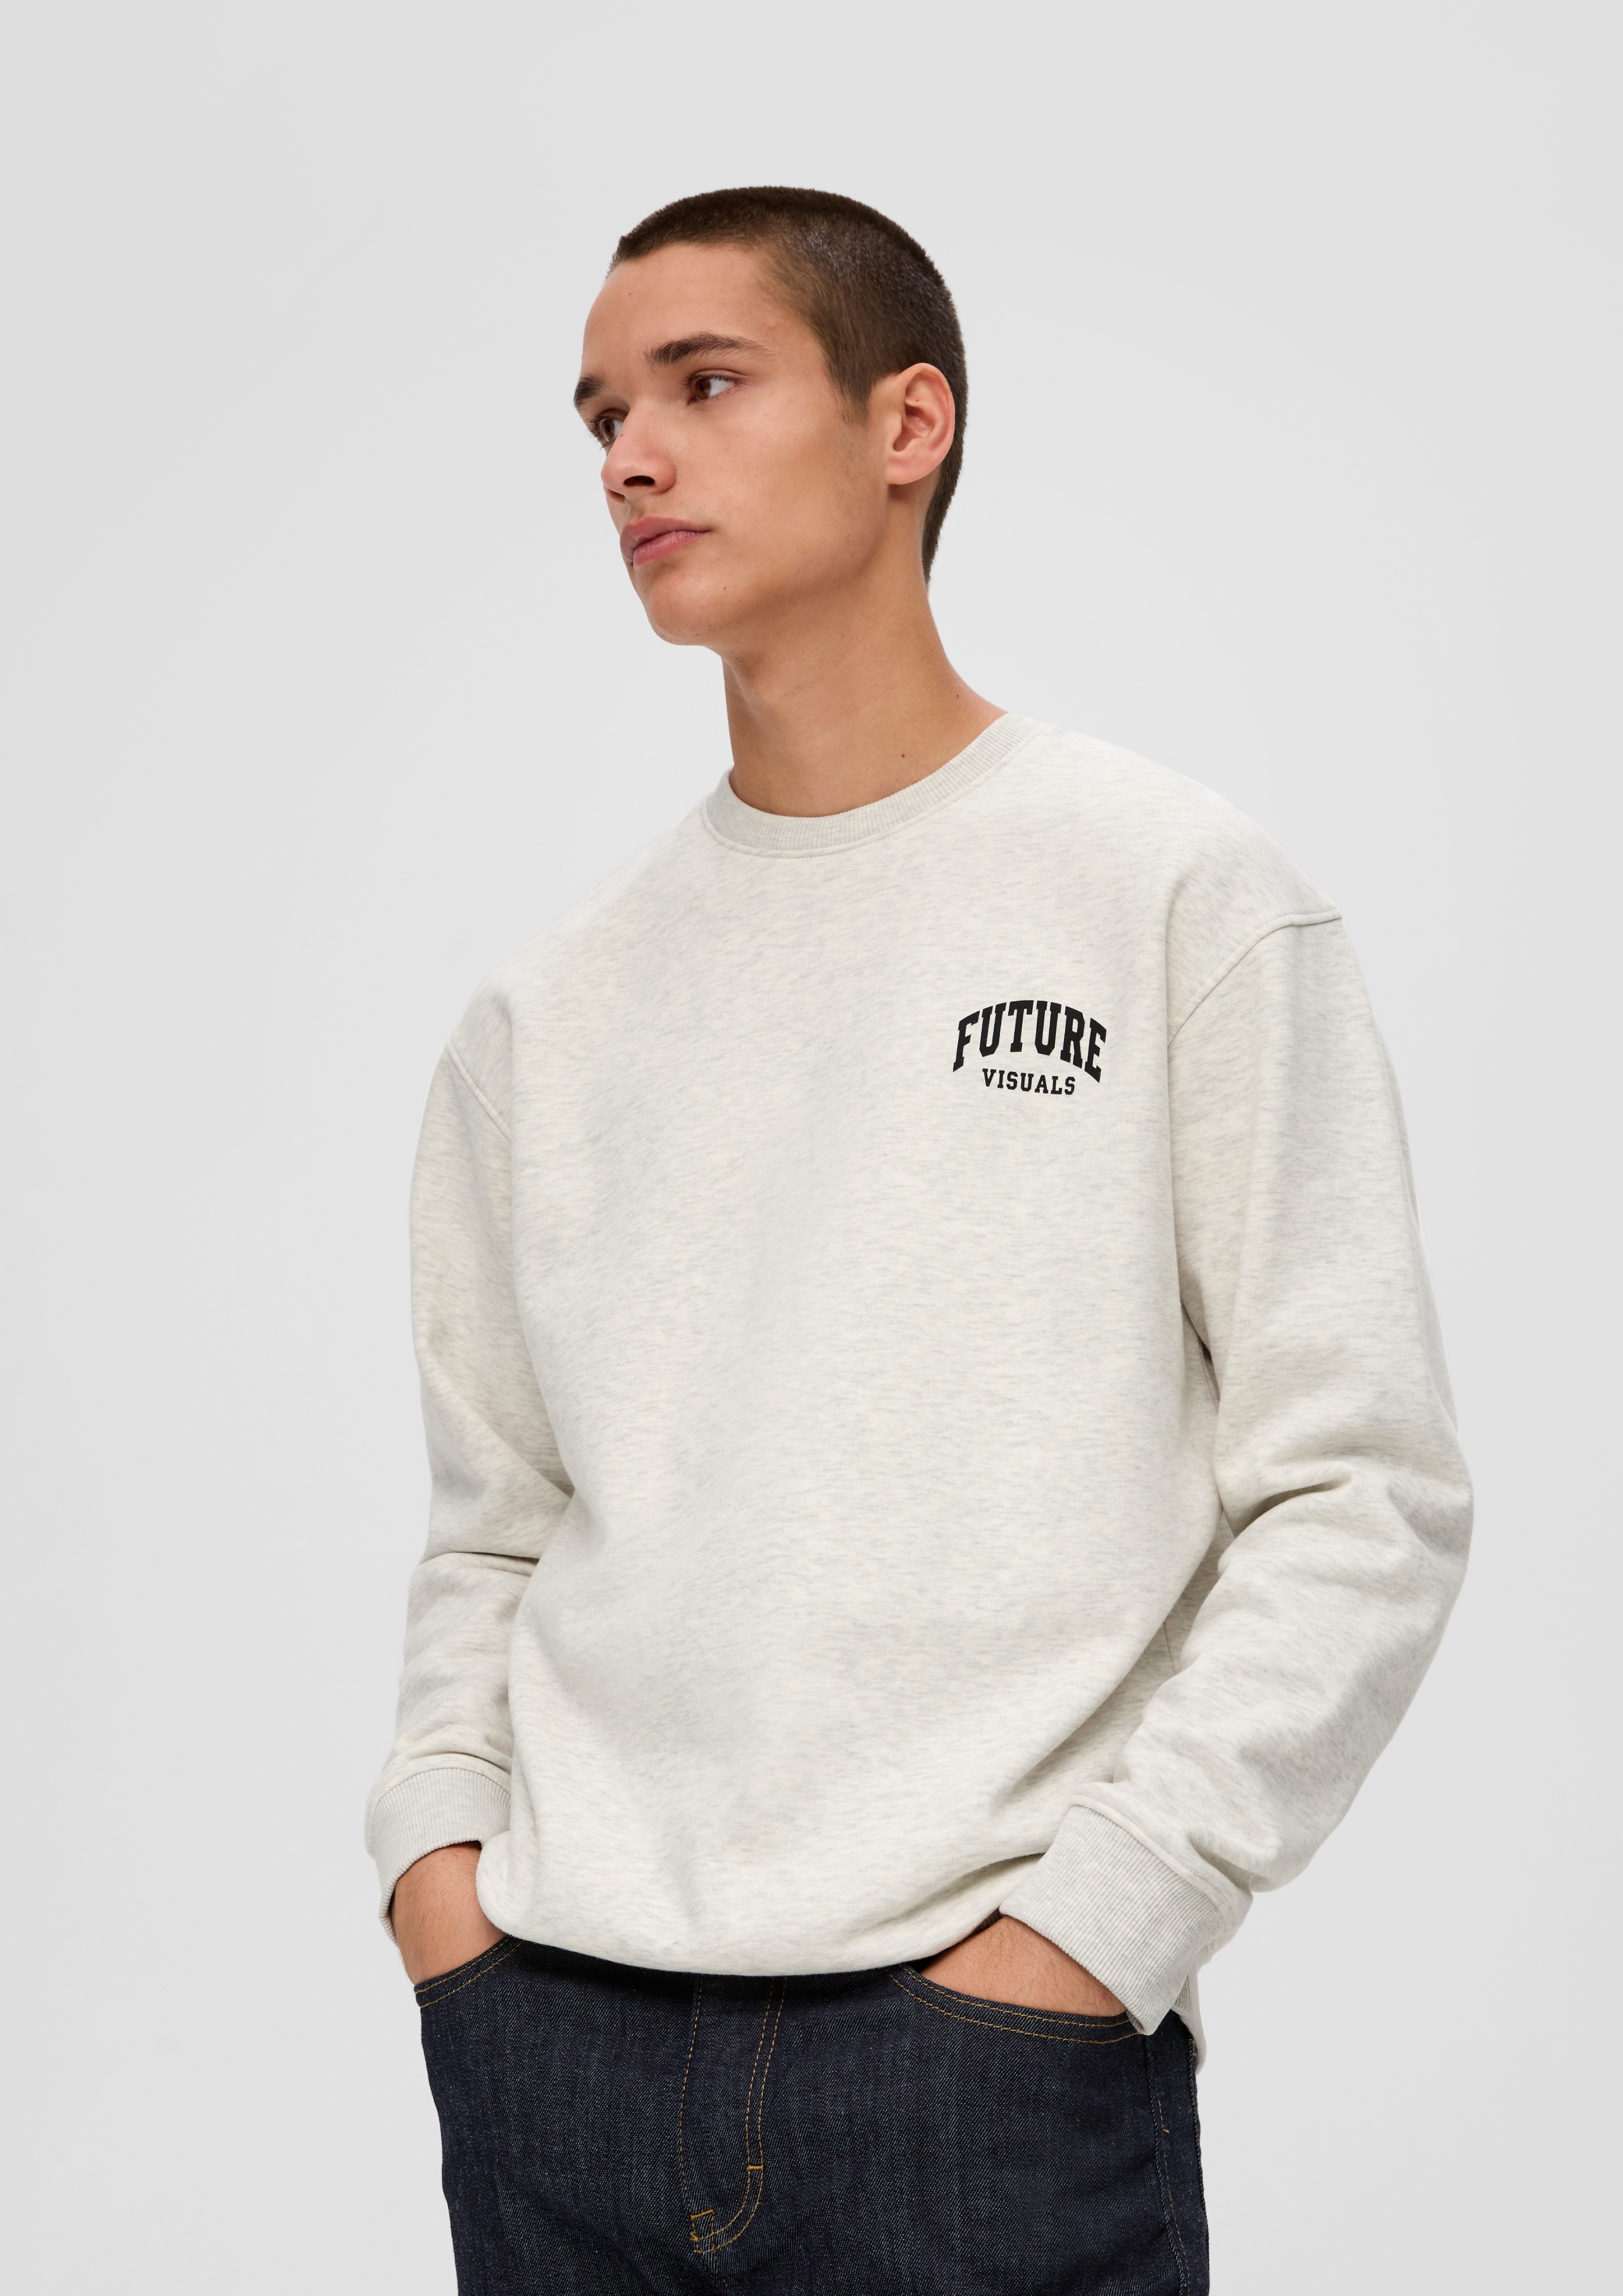 Sweatshirt with a white back - large print